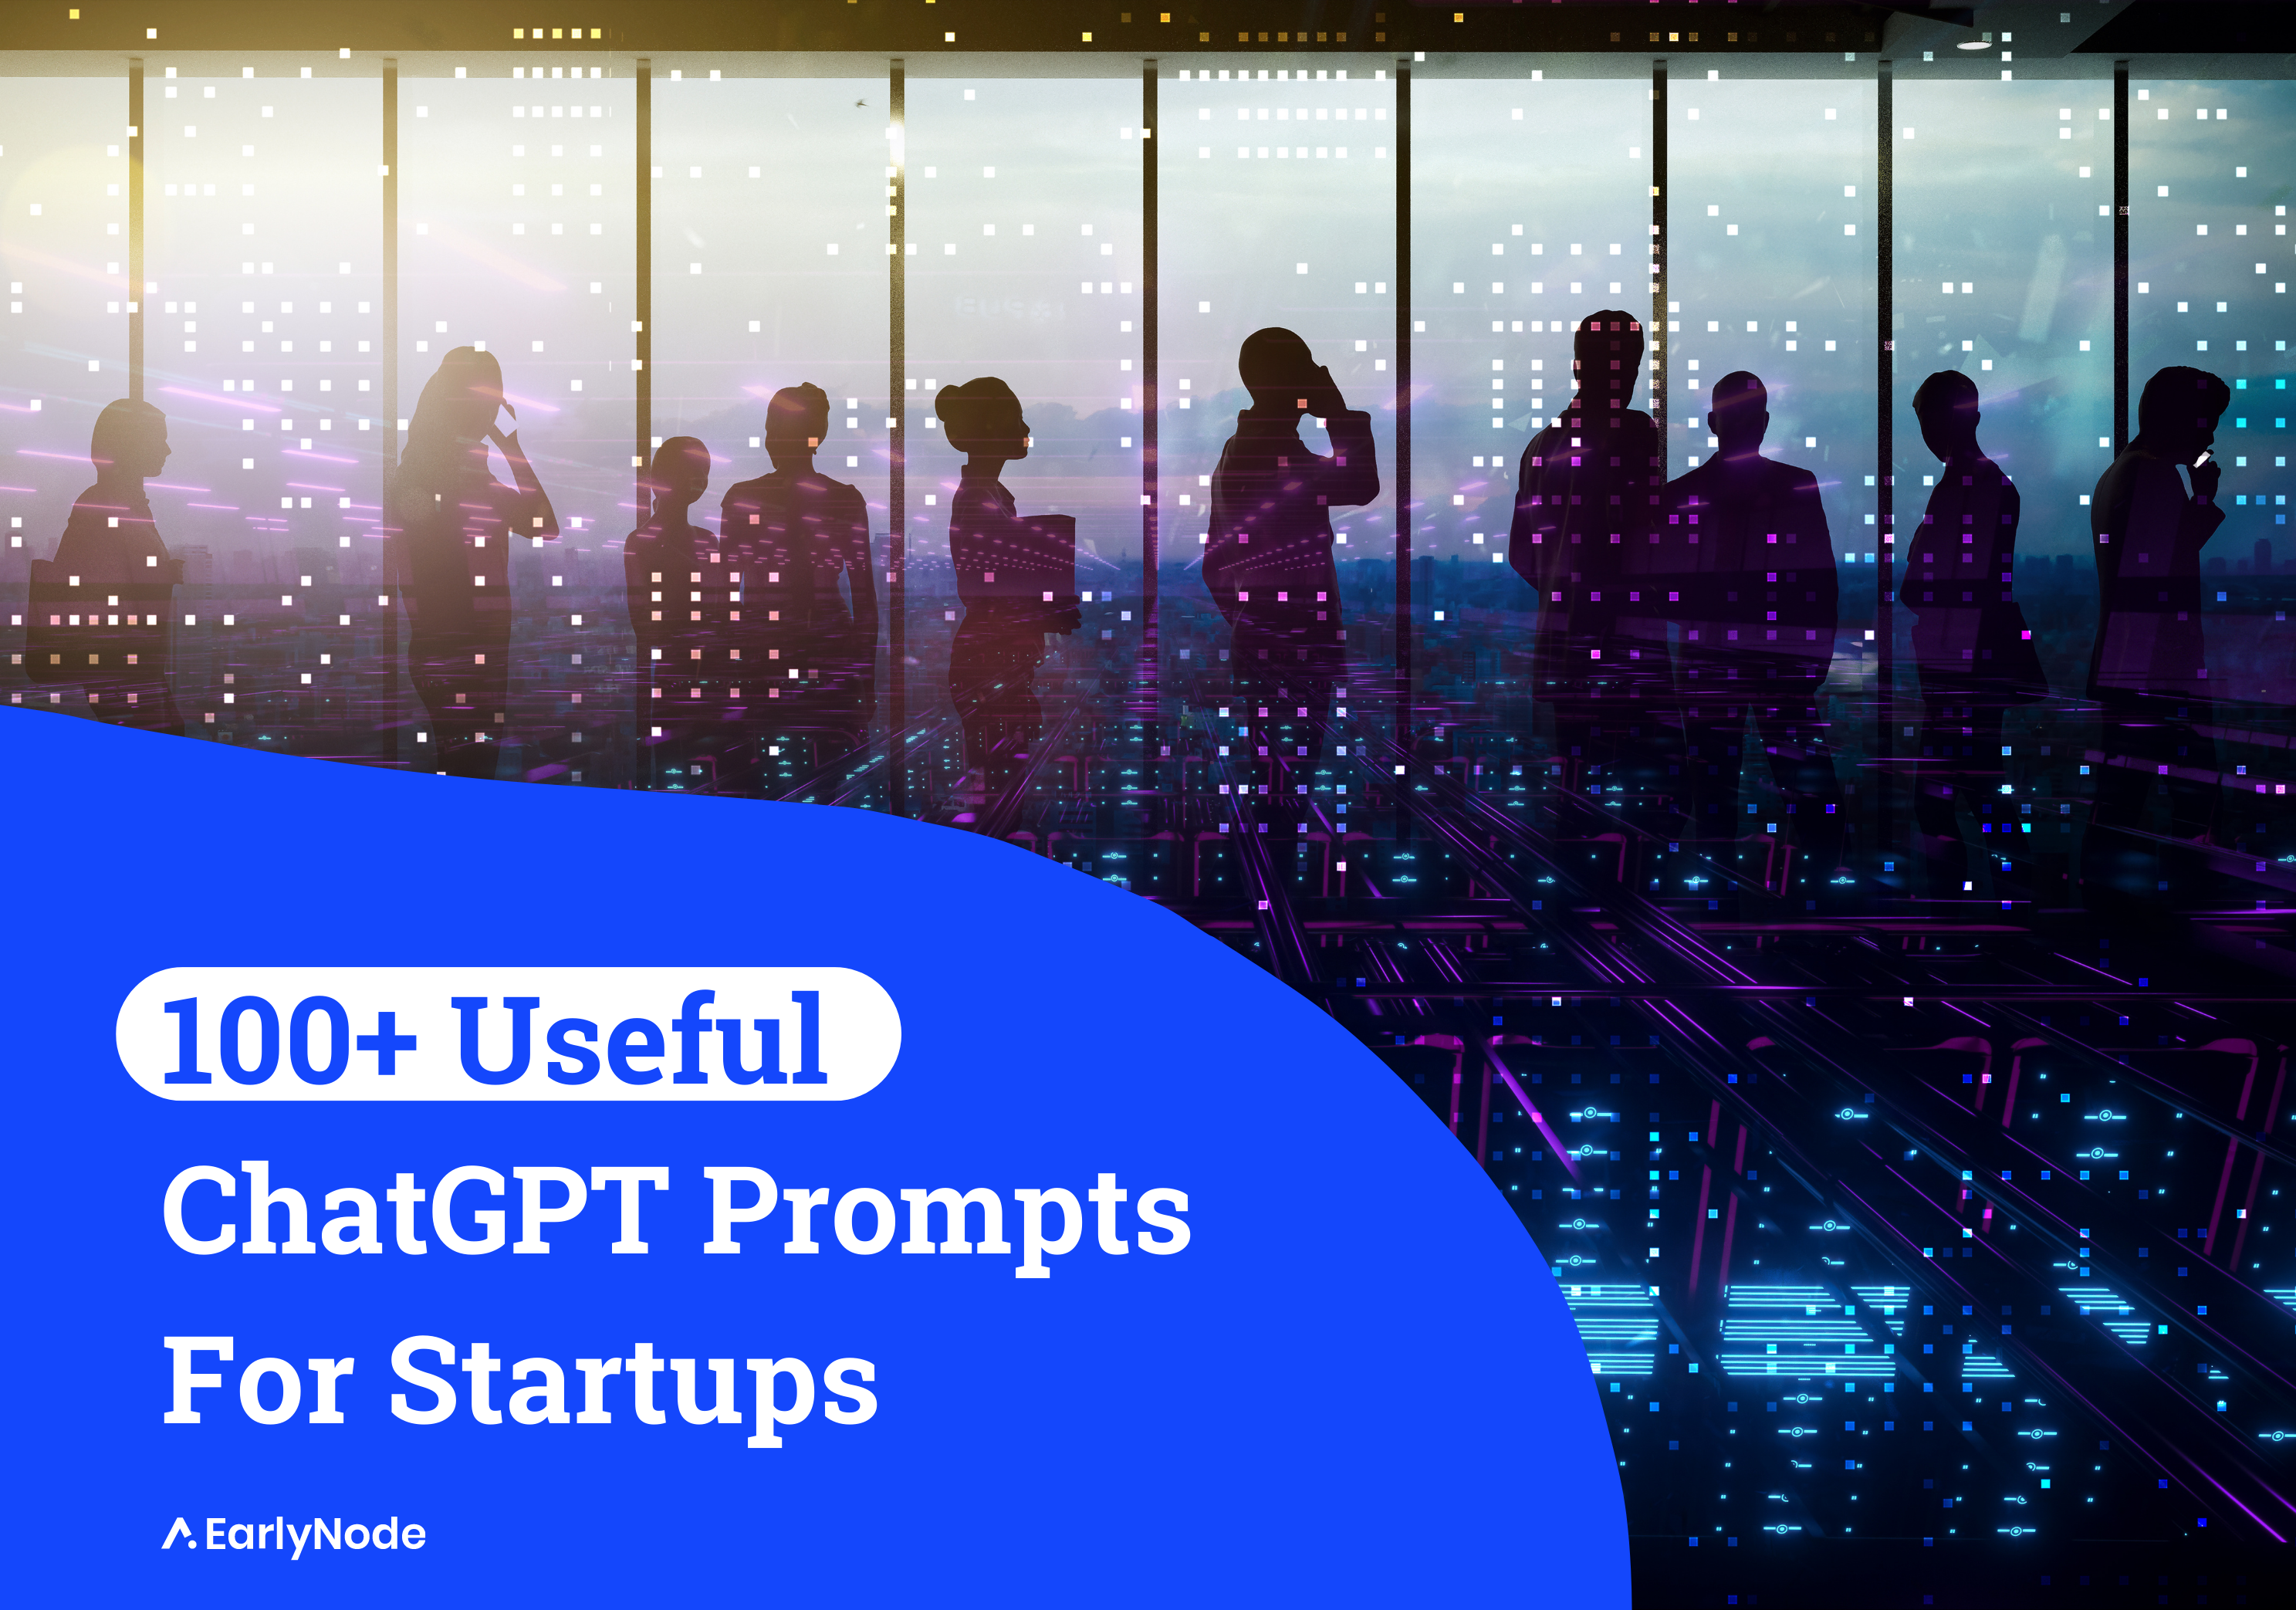 100+ Useful ChatGPT Prompts For Startups